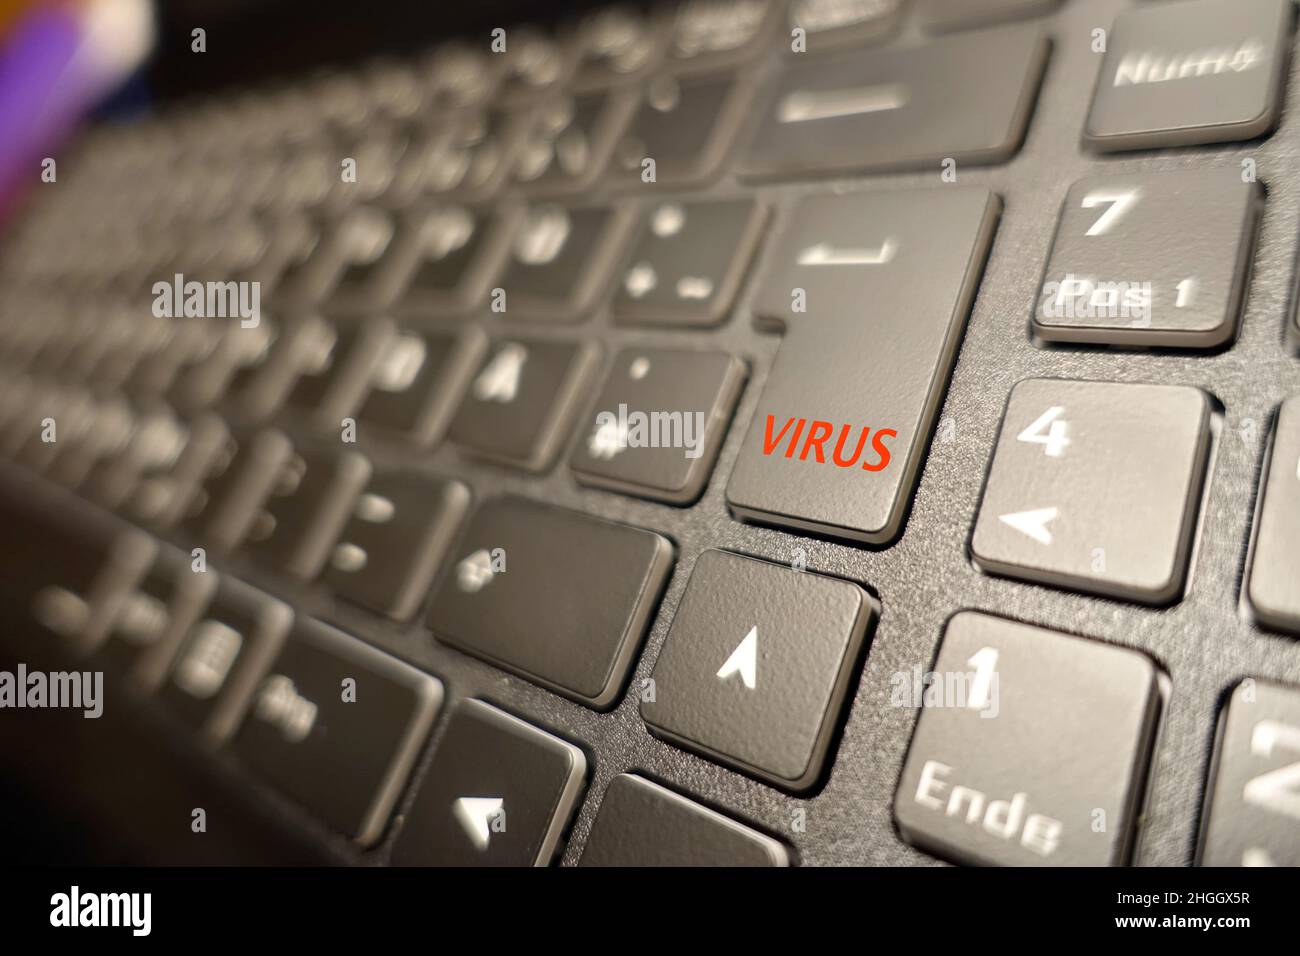 computer keyboard with a virus key - symbol for cyber crime Stock Photo